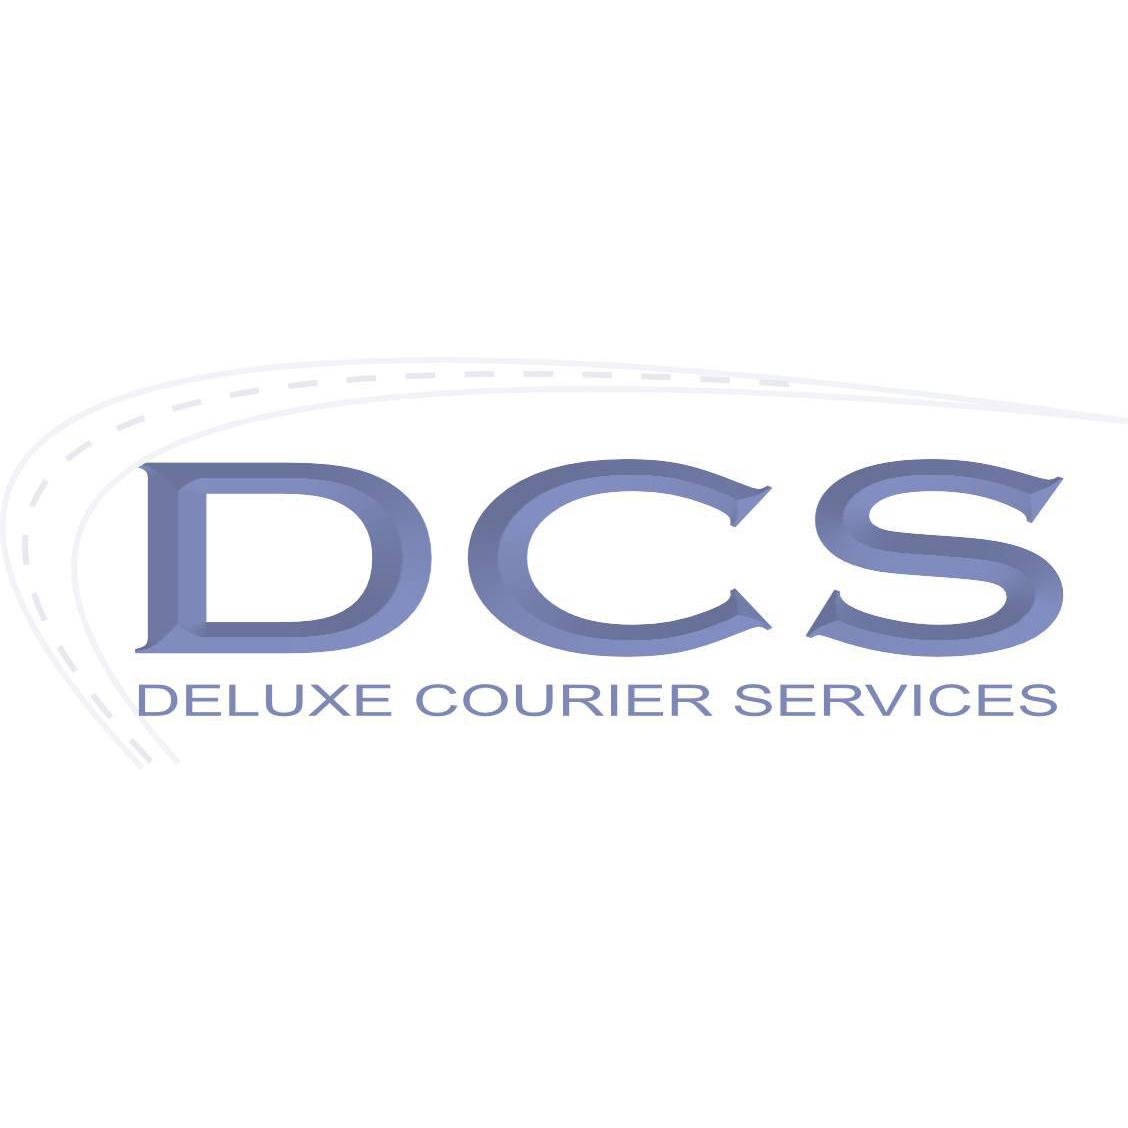 LOGO Deluxe Courier Services Ltd Crewe 01270 382077